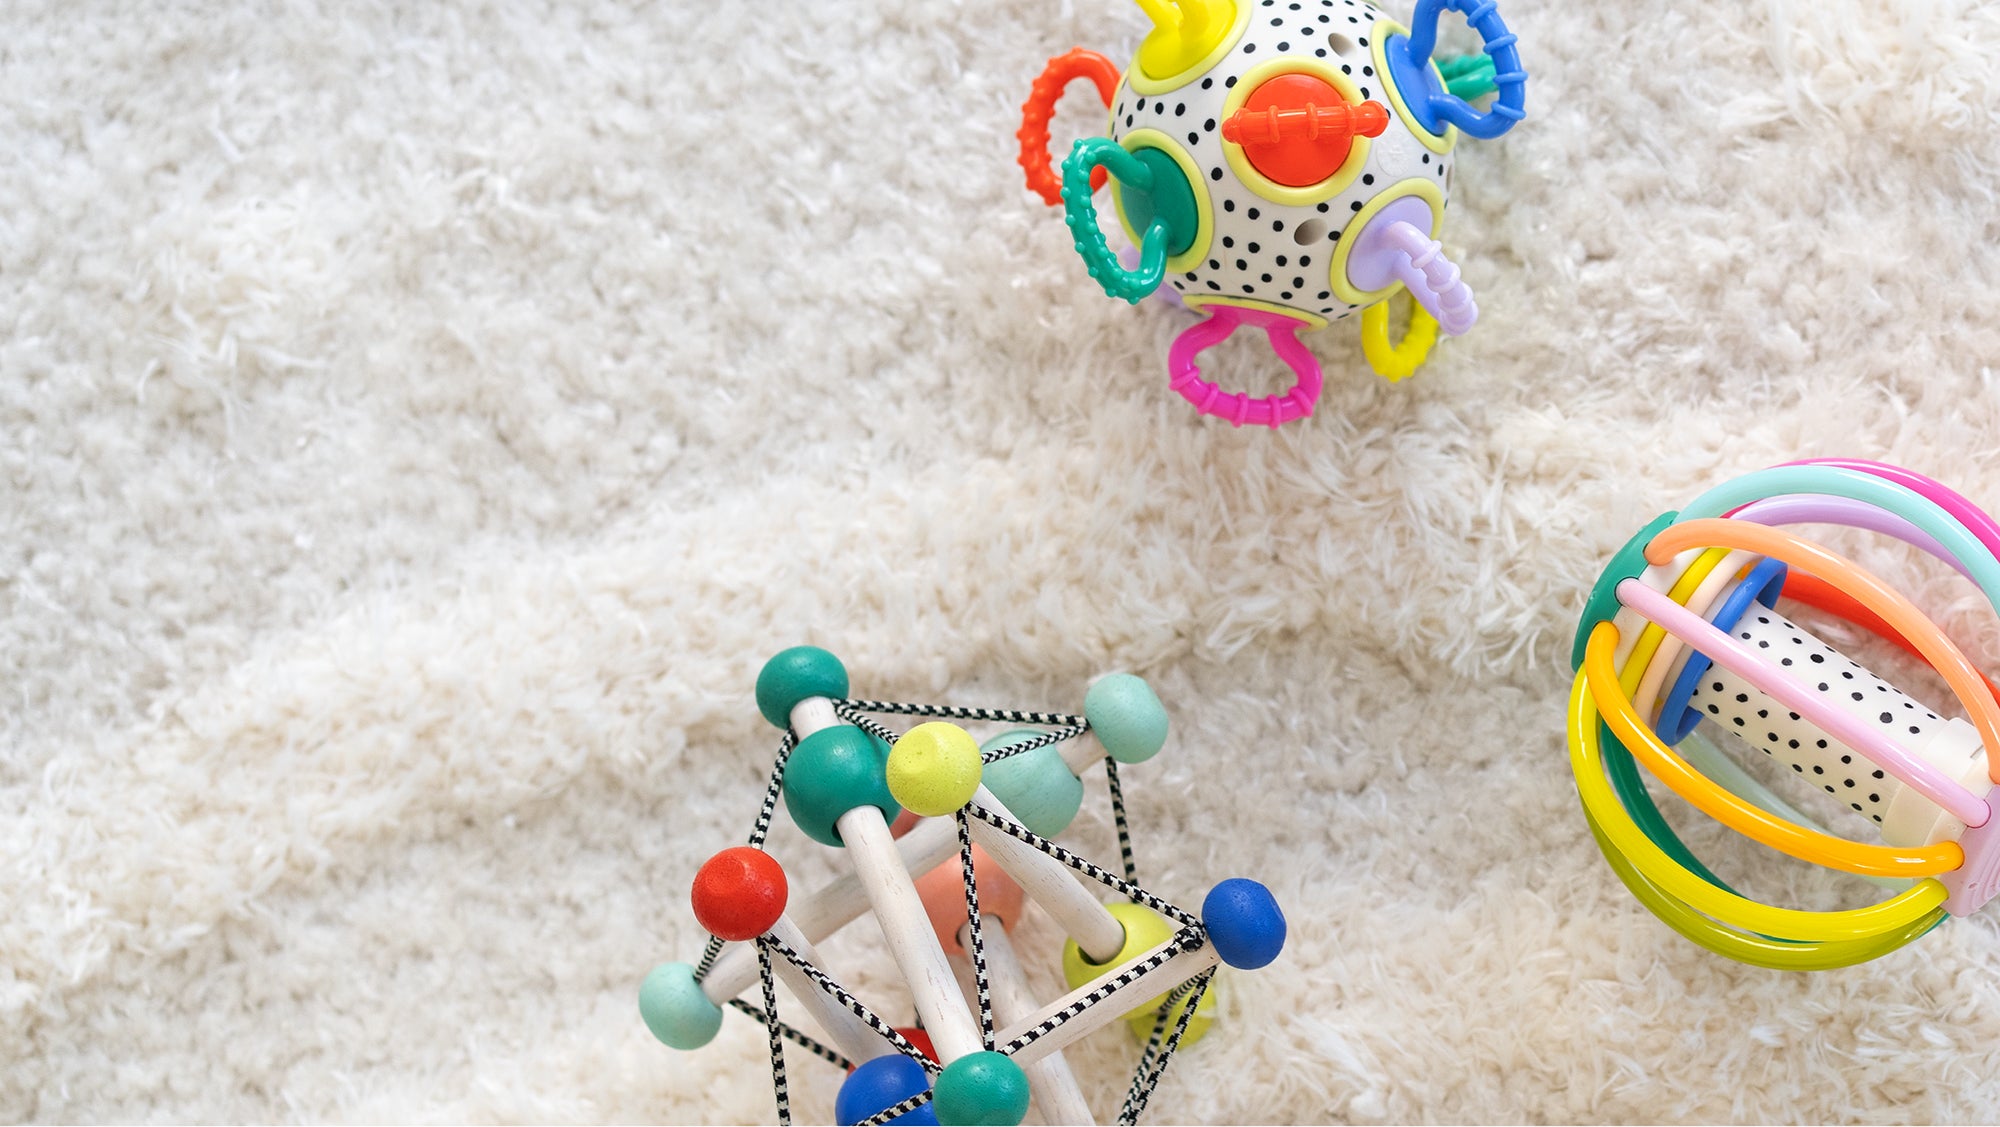 Colorful assortment of toys including blocks, balls, and vehicles on a white background.